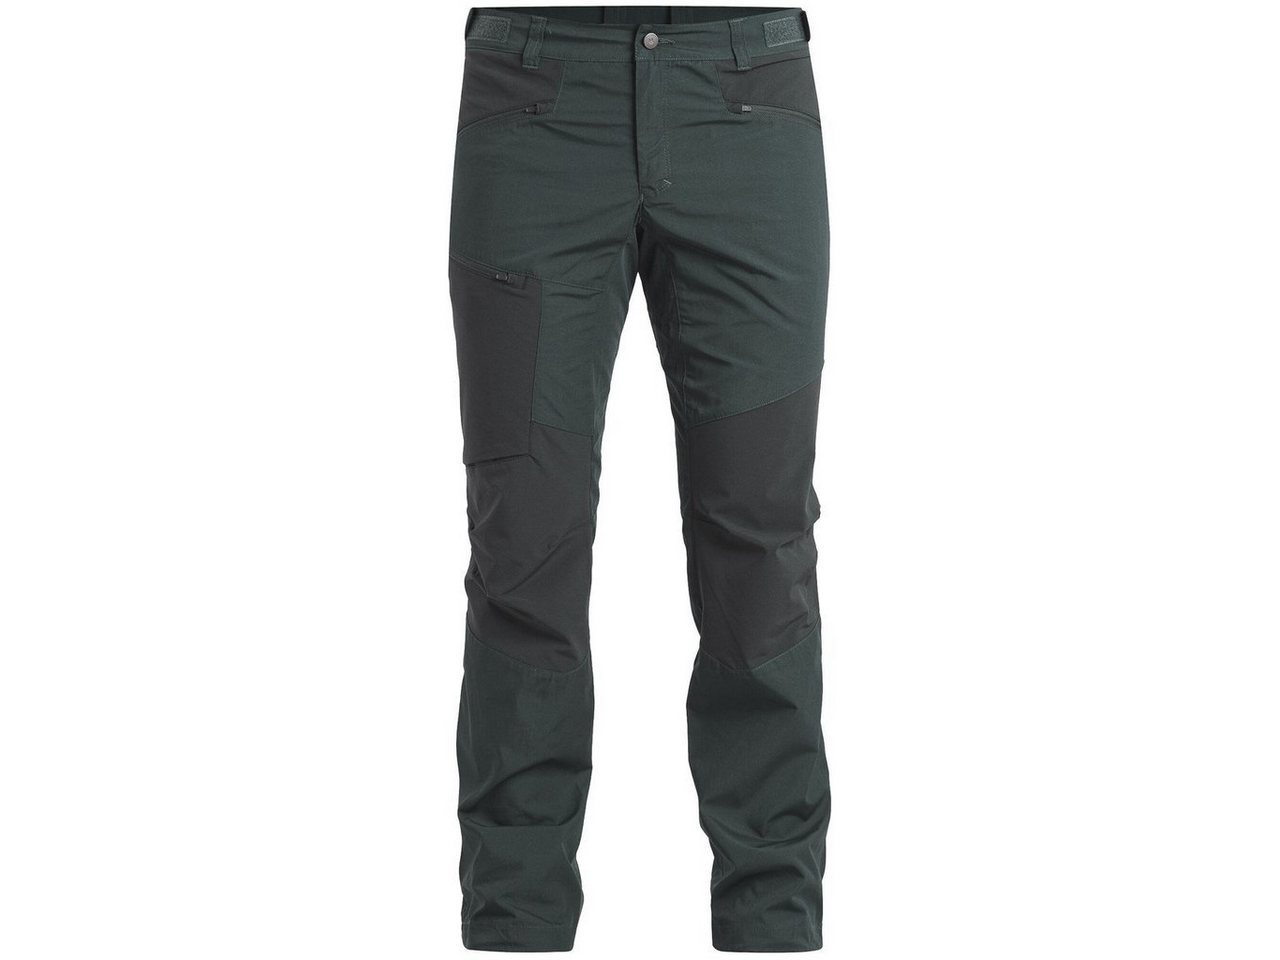 Lundhags Outdoorhose Makke Lt Ms Pant von Lundhags